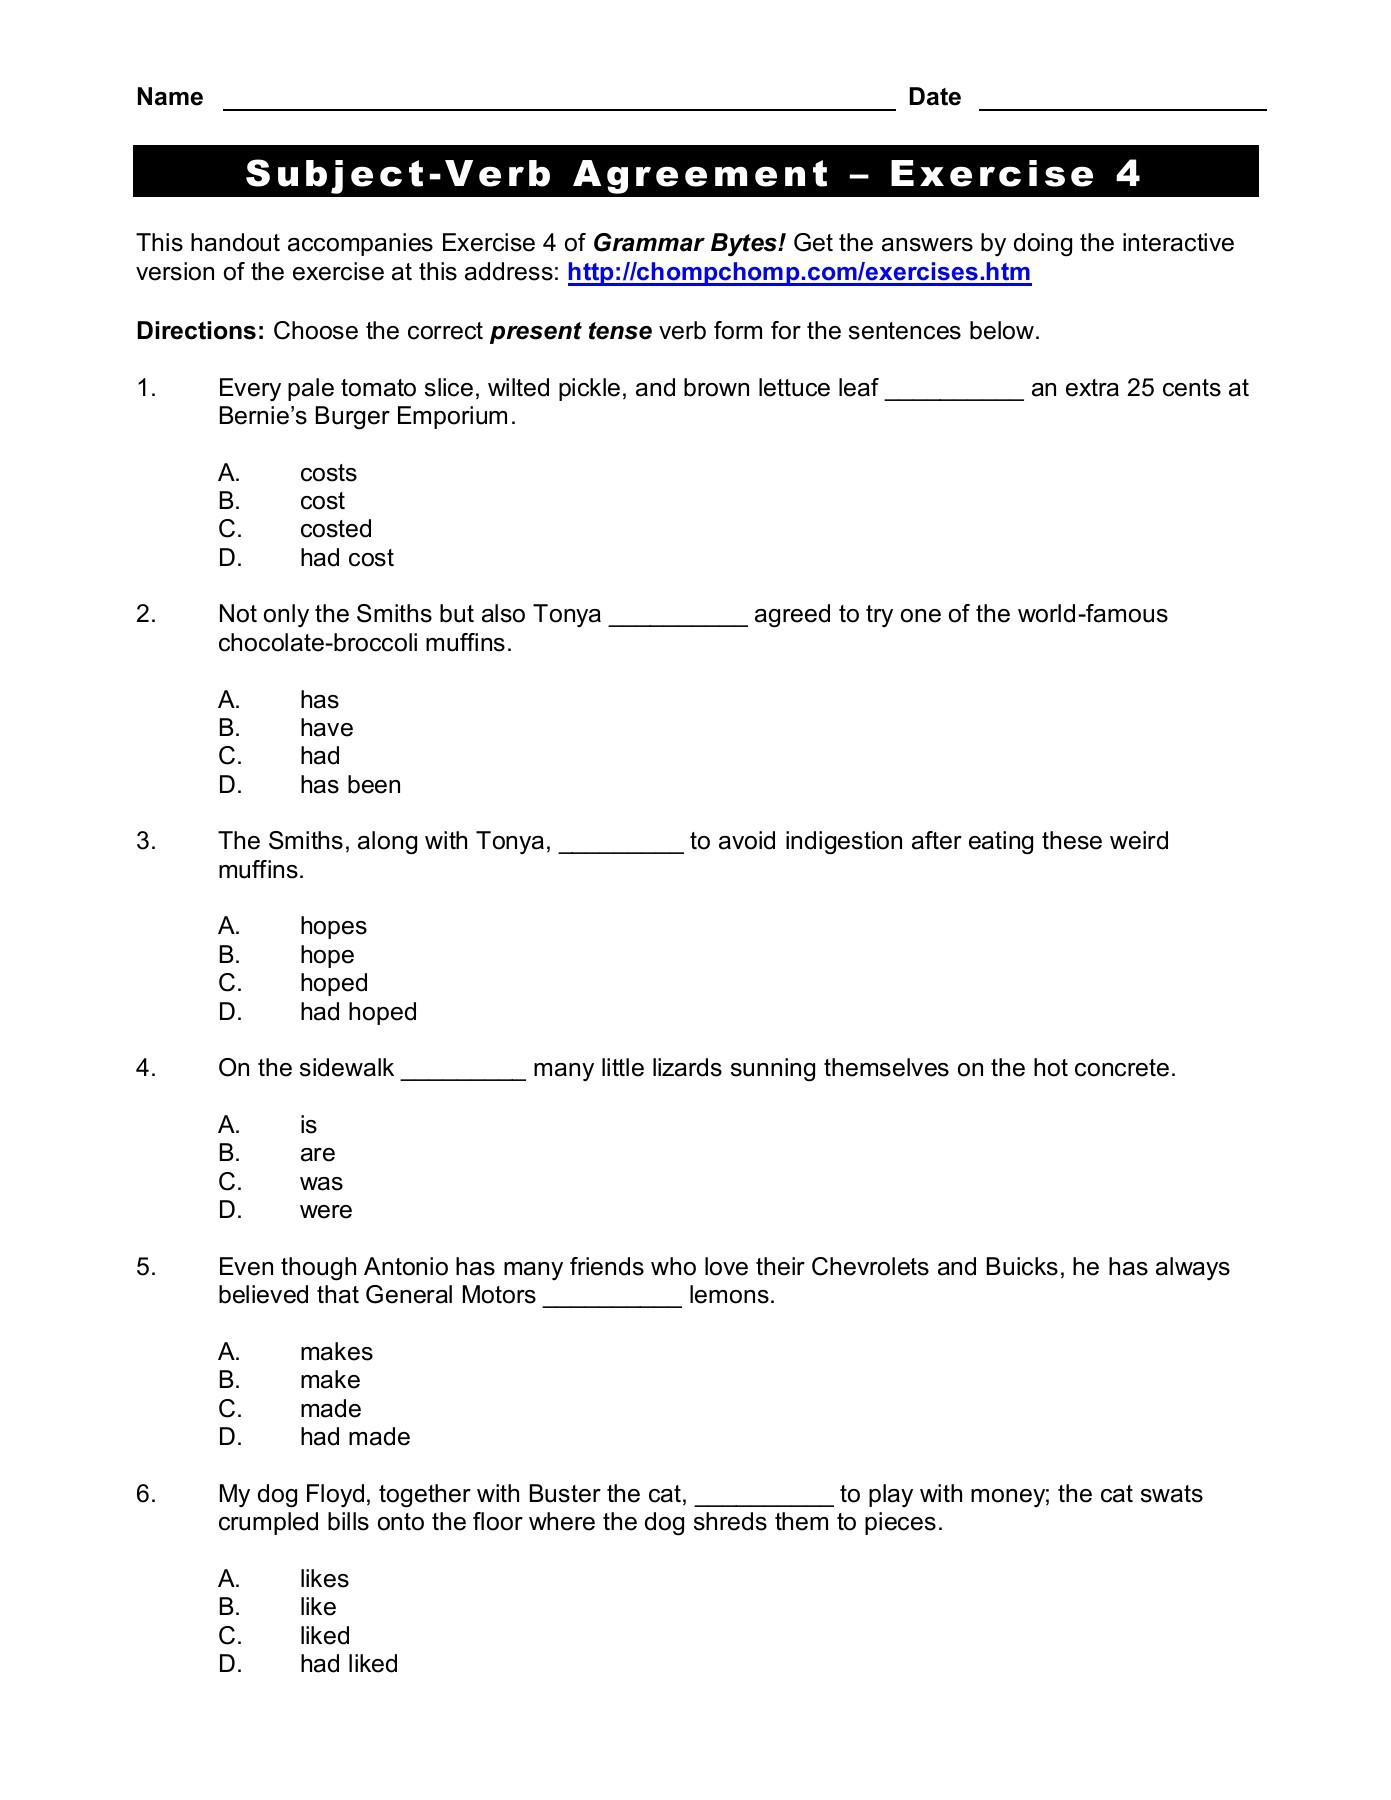 Subject Verb Agreement Practice Worksheet The Children Clean Cleans The Room